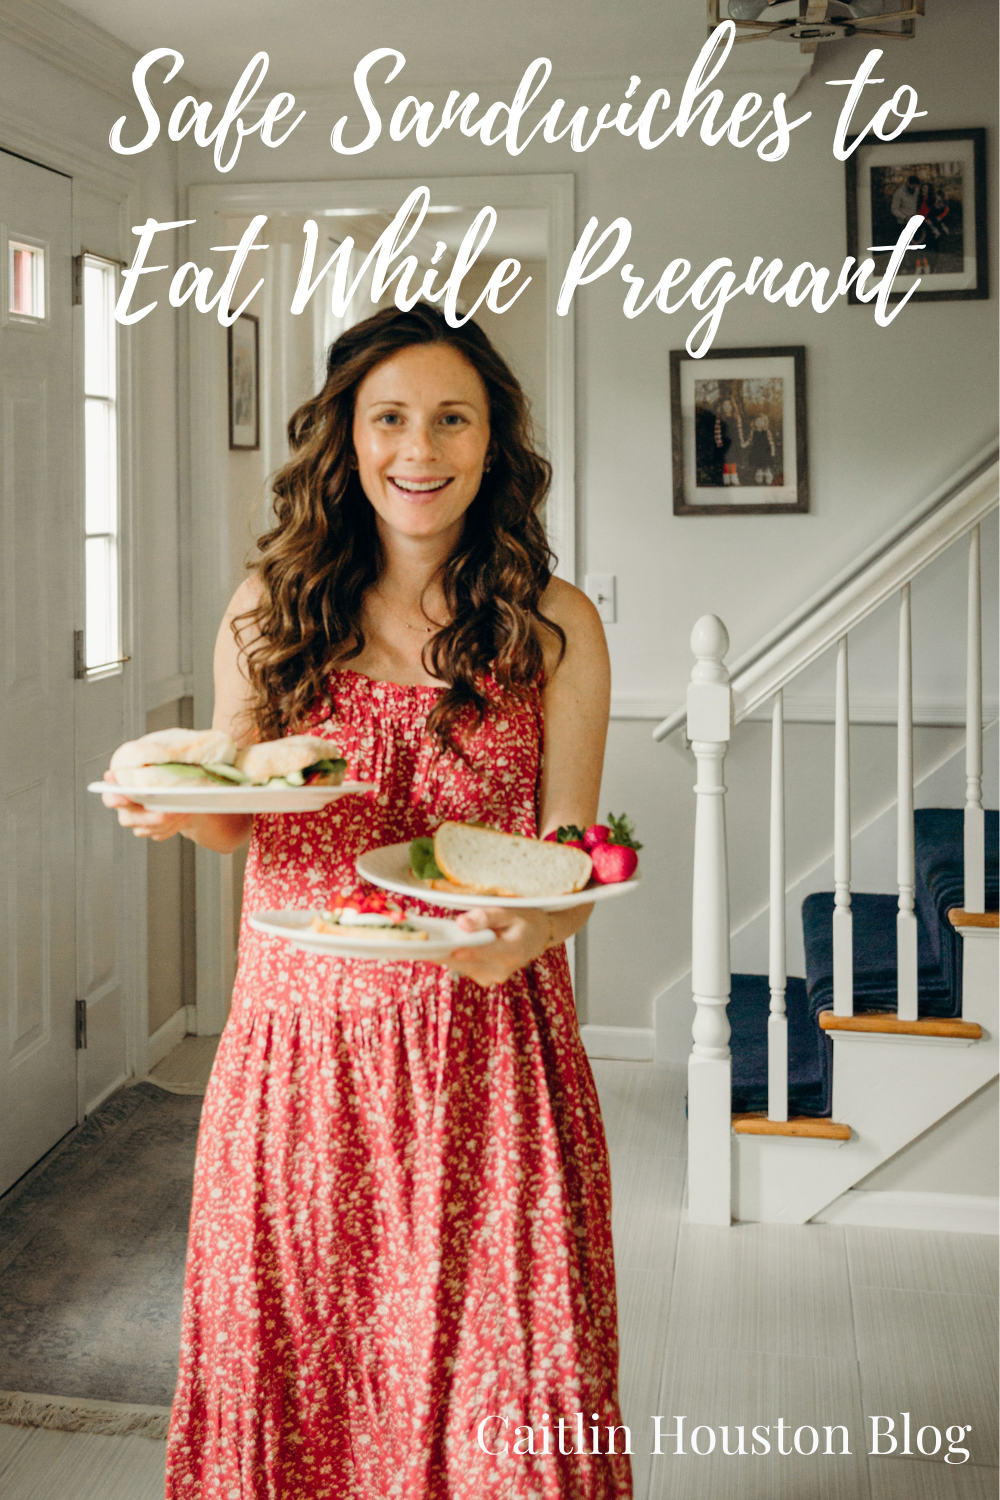 Sandwiches to Eat While Pregnant.